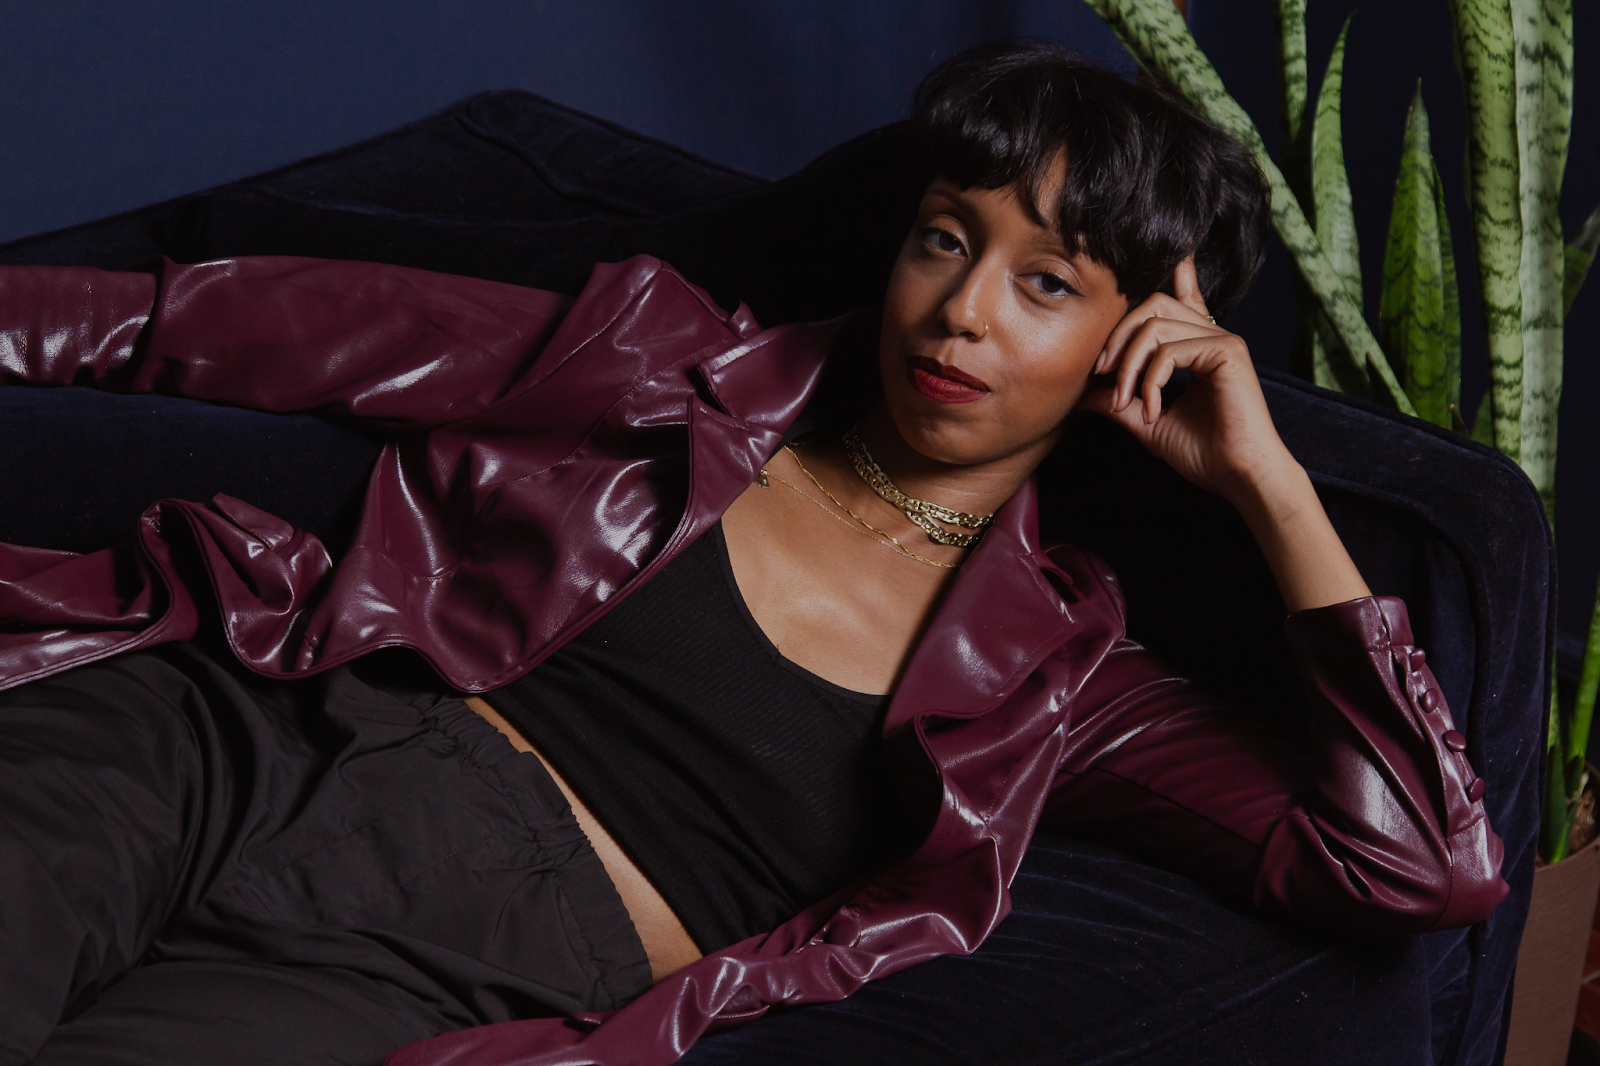 Image: The portrait features Barédu lying down on a dark blue couch in front of a dark blue wall. Behind her, to the right is a snake plant. She has on a burgundy jacket, a black top, and black pants and is wearing gold necklaces, bracelets, and earrings. Image captured and edited by Joshua Johnson.